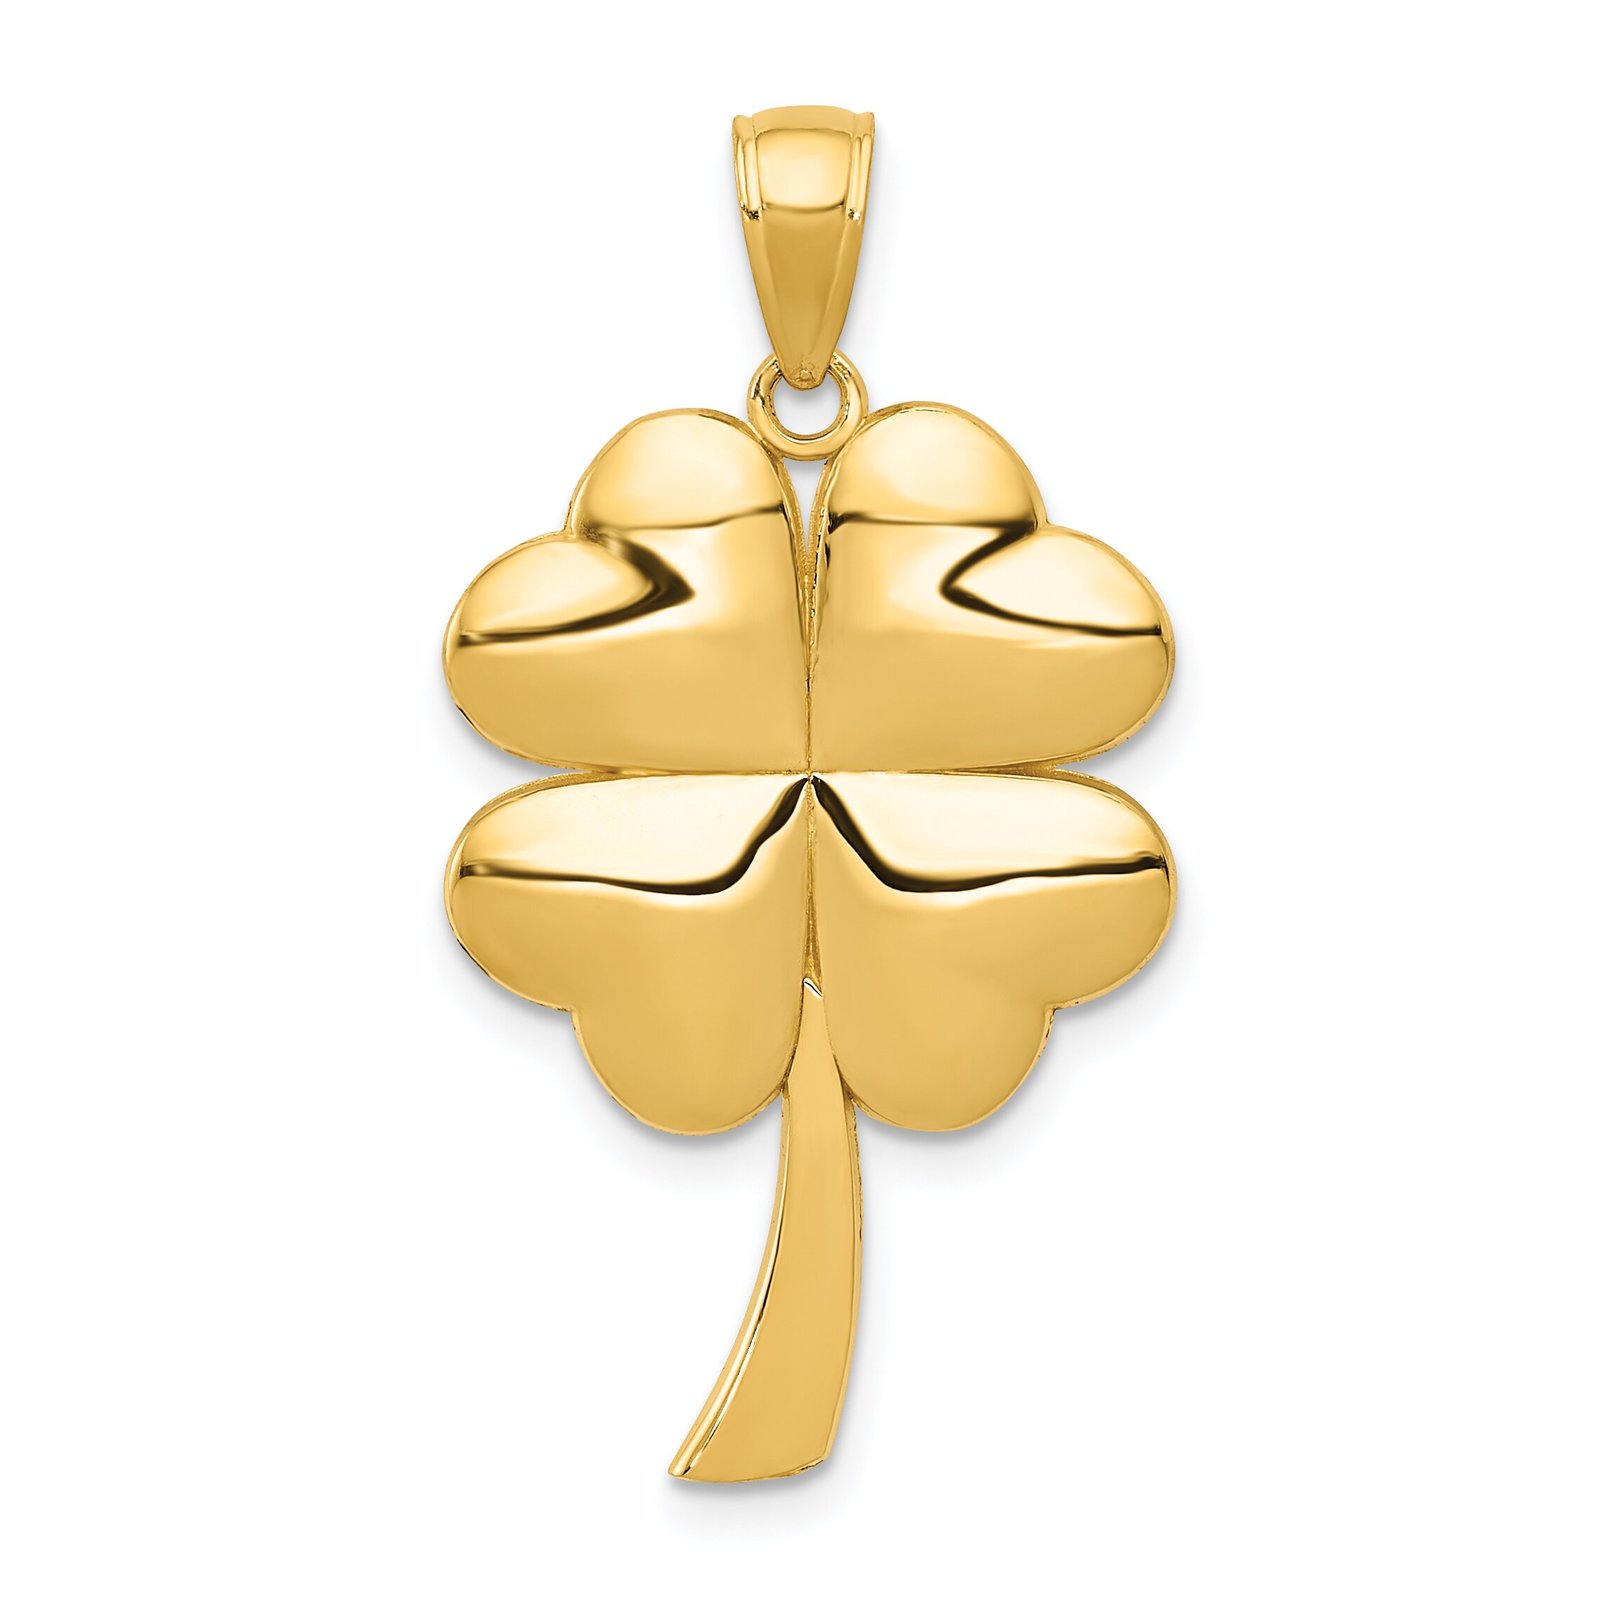 Primary image for 14K Yellow Gold 4 Leaf Clover Charm Good Luck Pendant Jewerly 30mm x 18mm